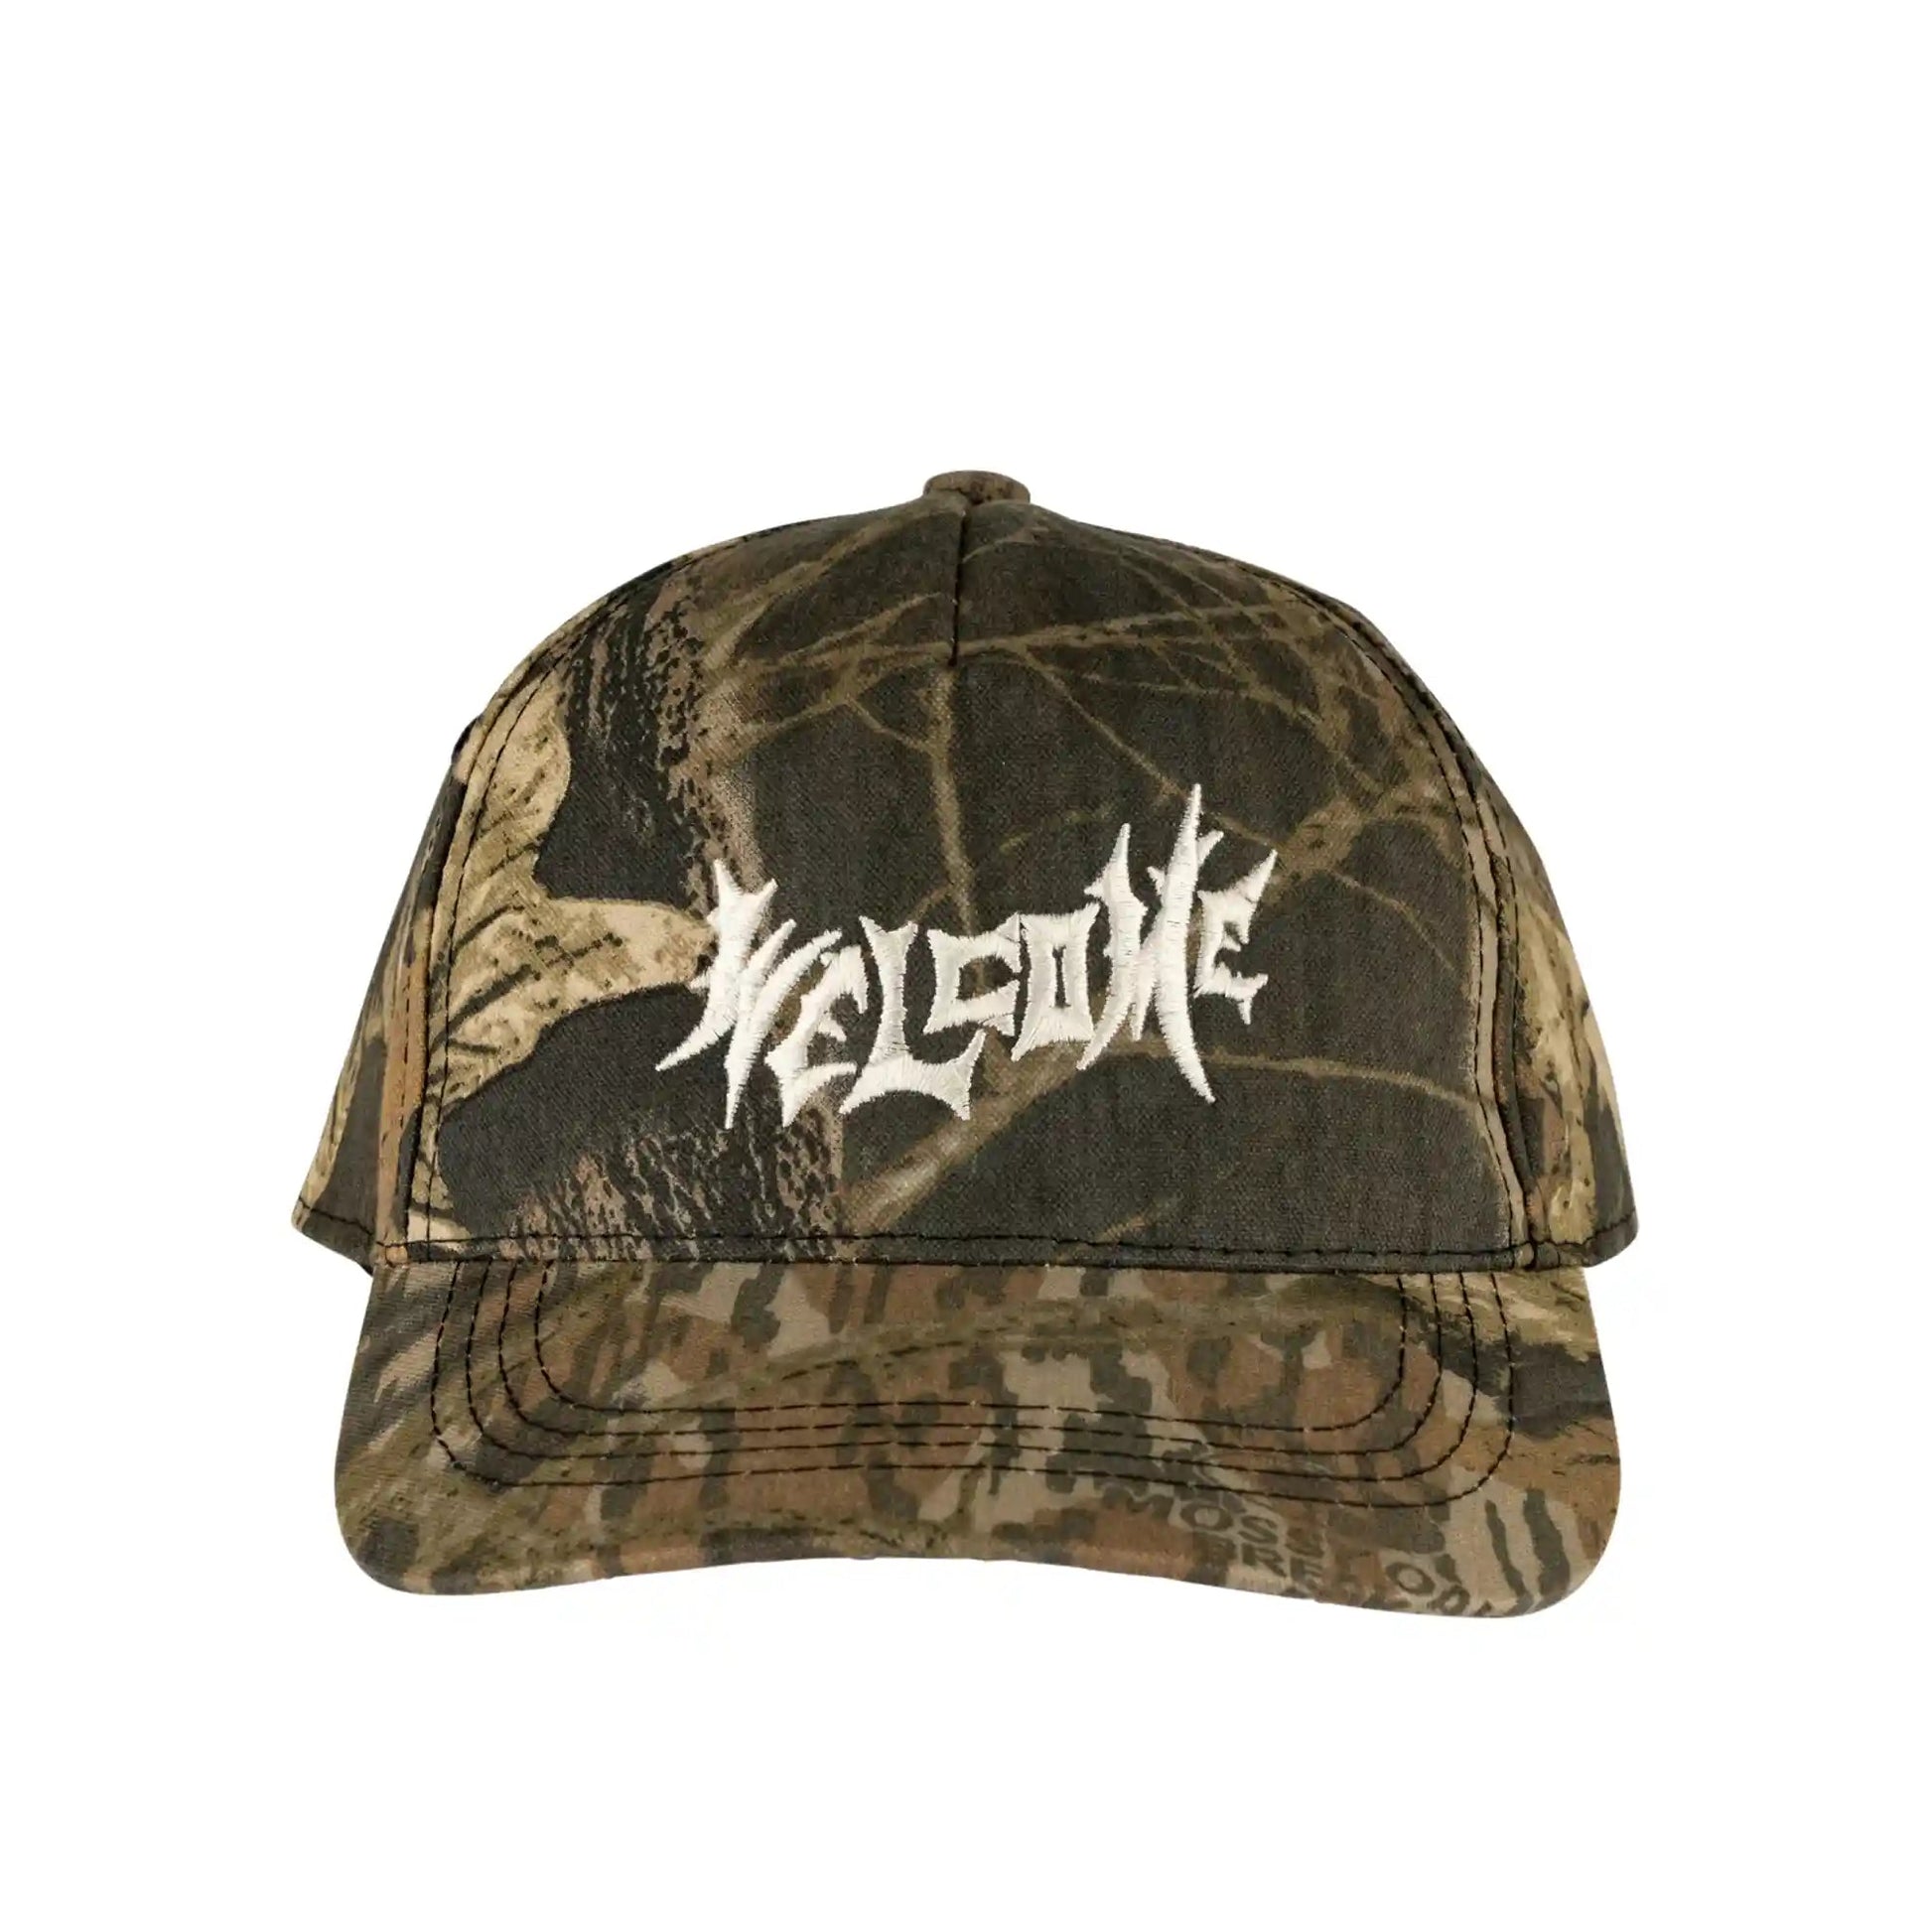 Welcome Vamp Embroidered Hat, camo - Tiki Room Skateboards - 3